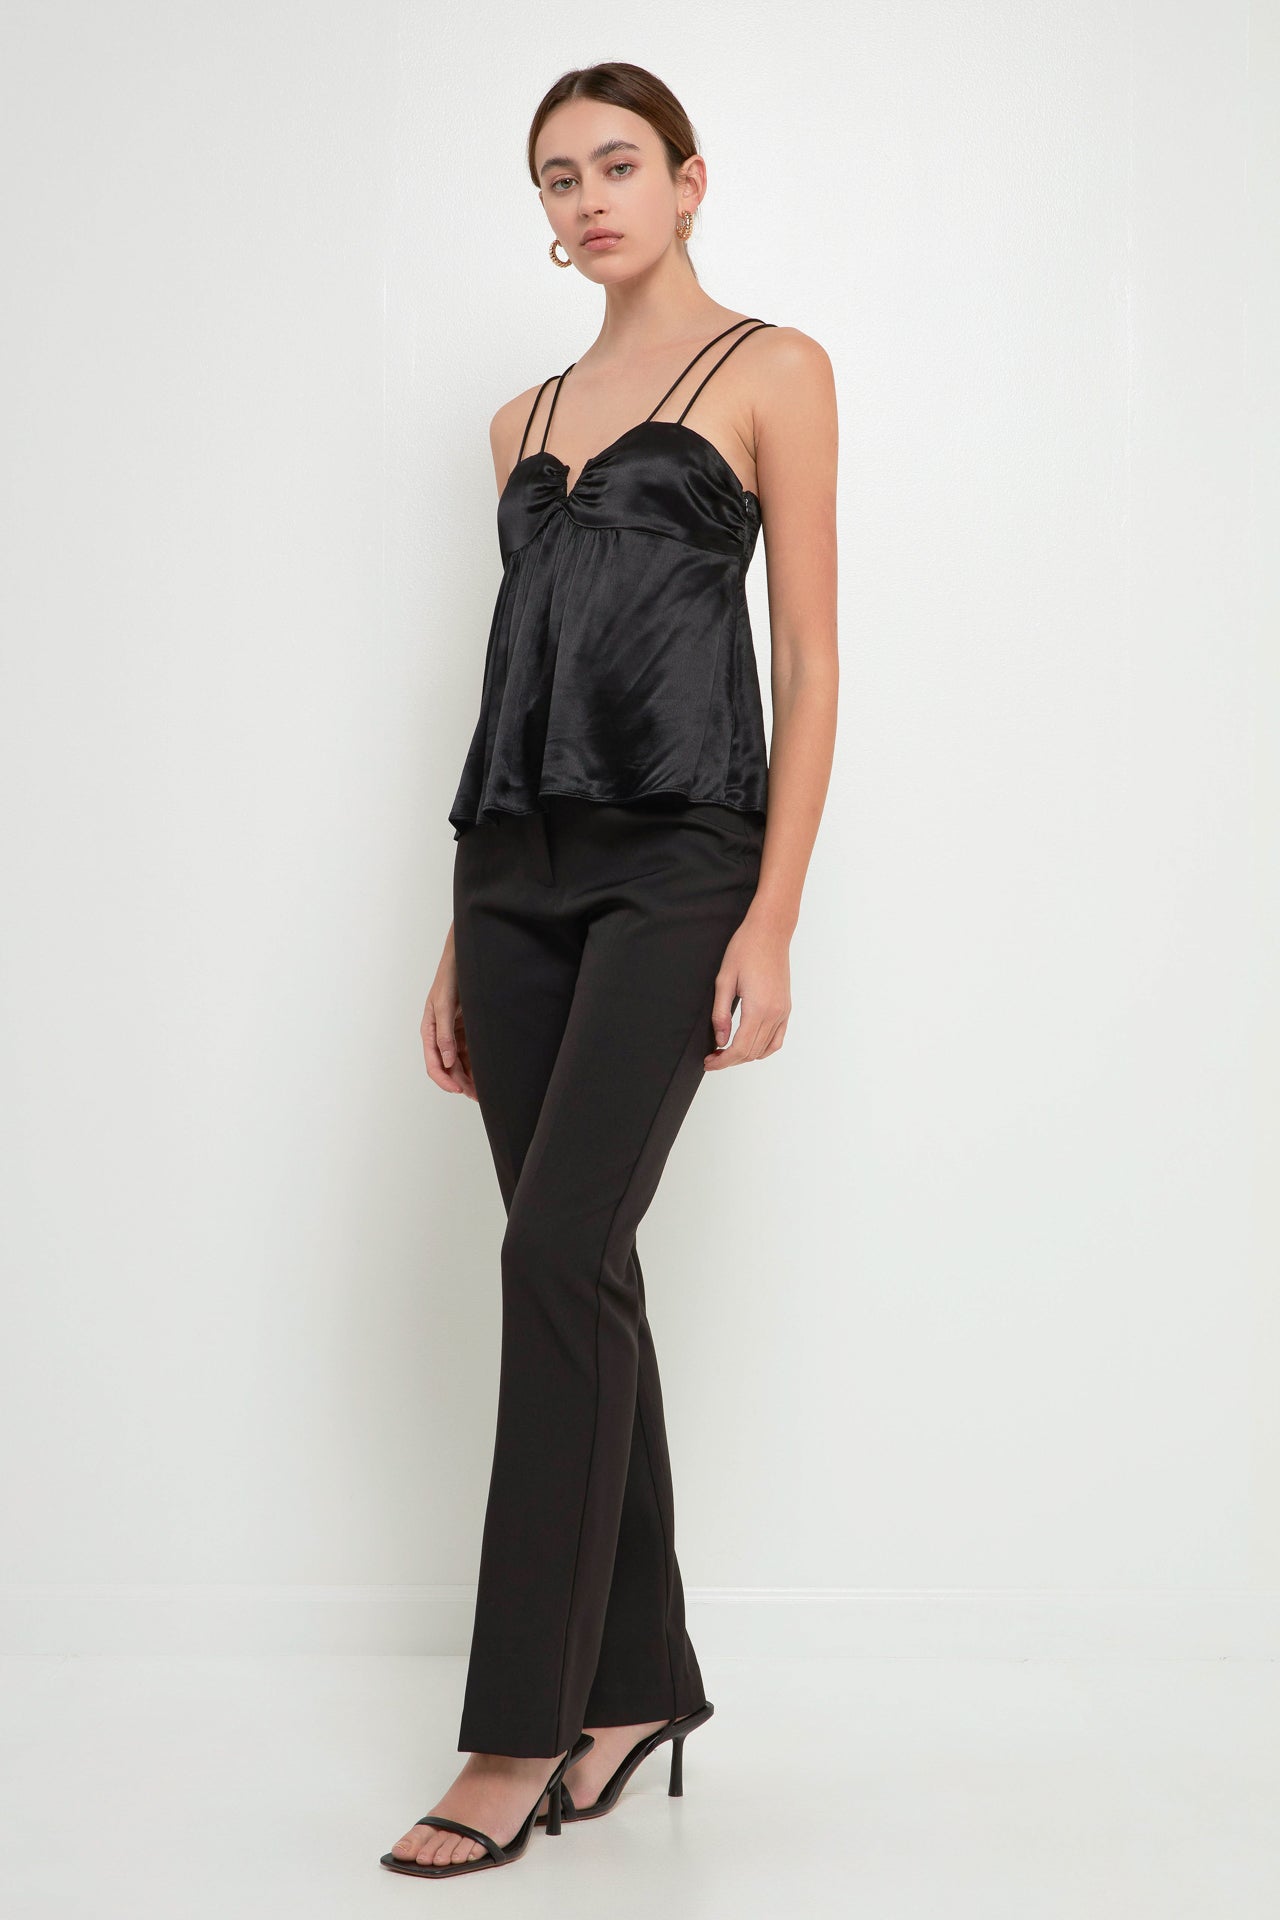 ENDLESS ROSE - Double Strap Satin Top - TOPS available at Objectrare